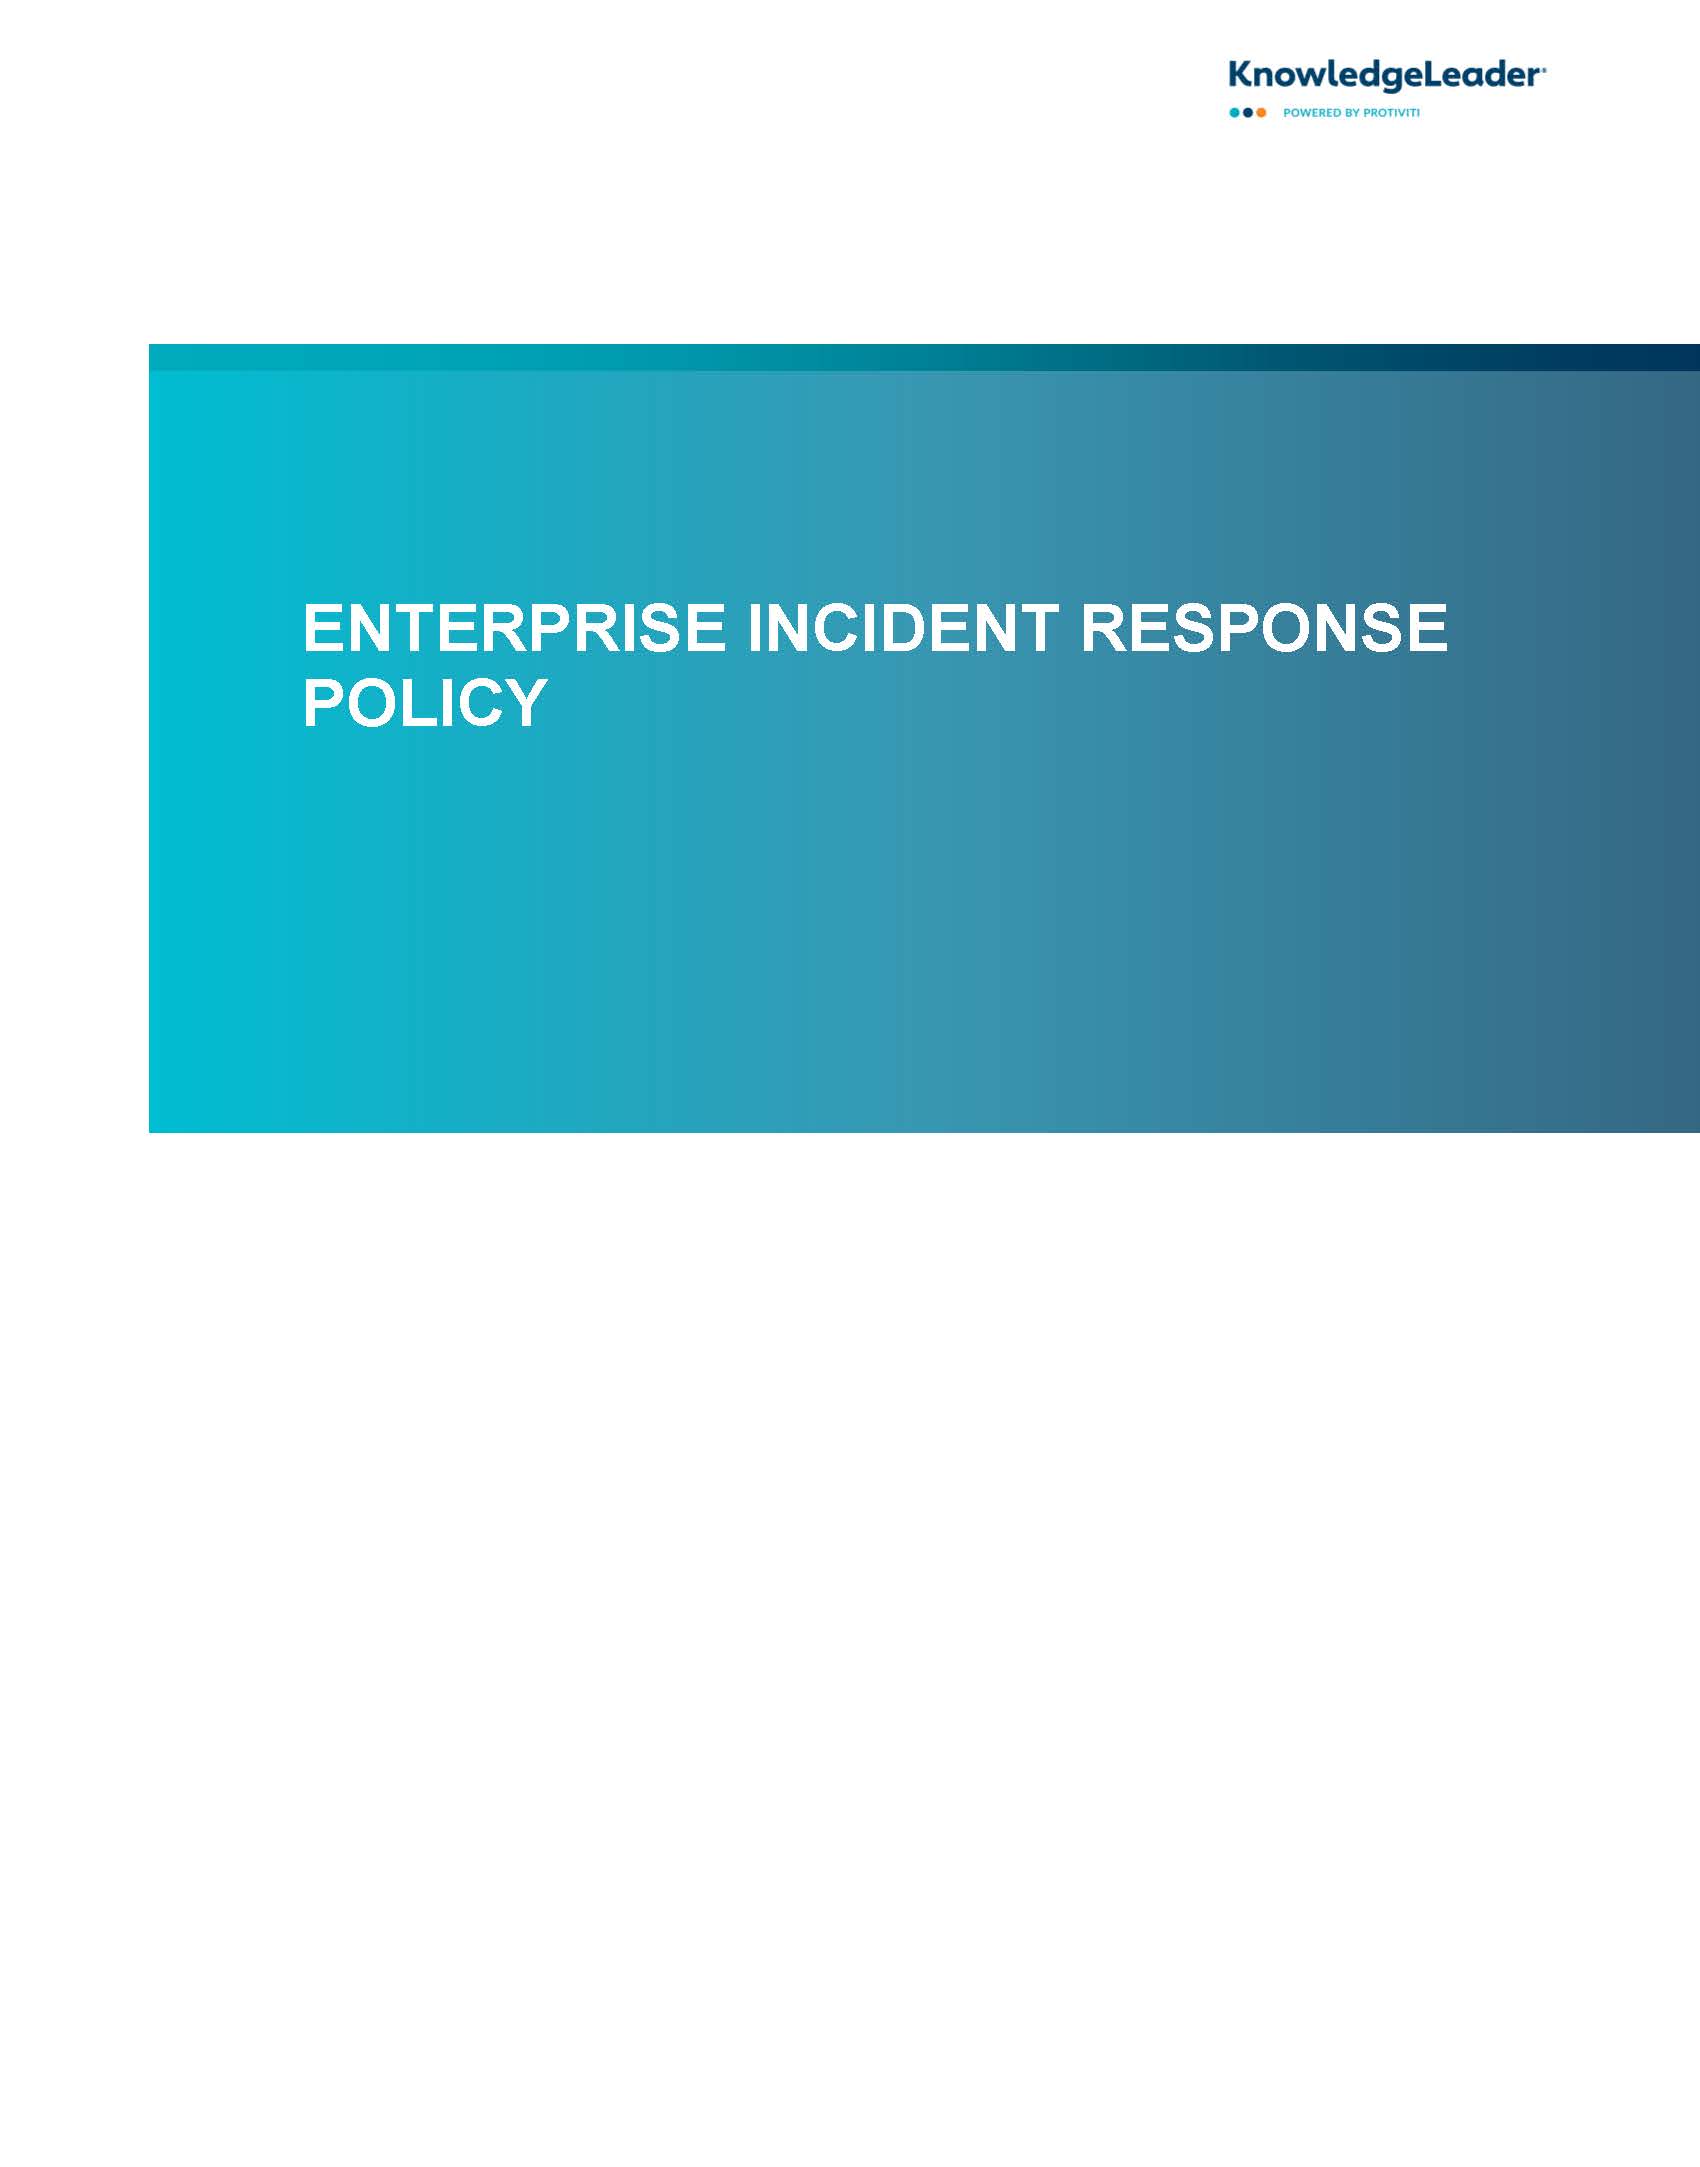 Screenshot of the first page of Enterprise Incident Response Policy